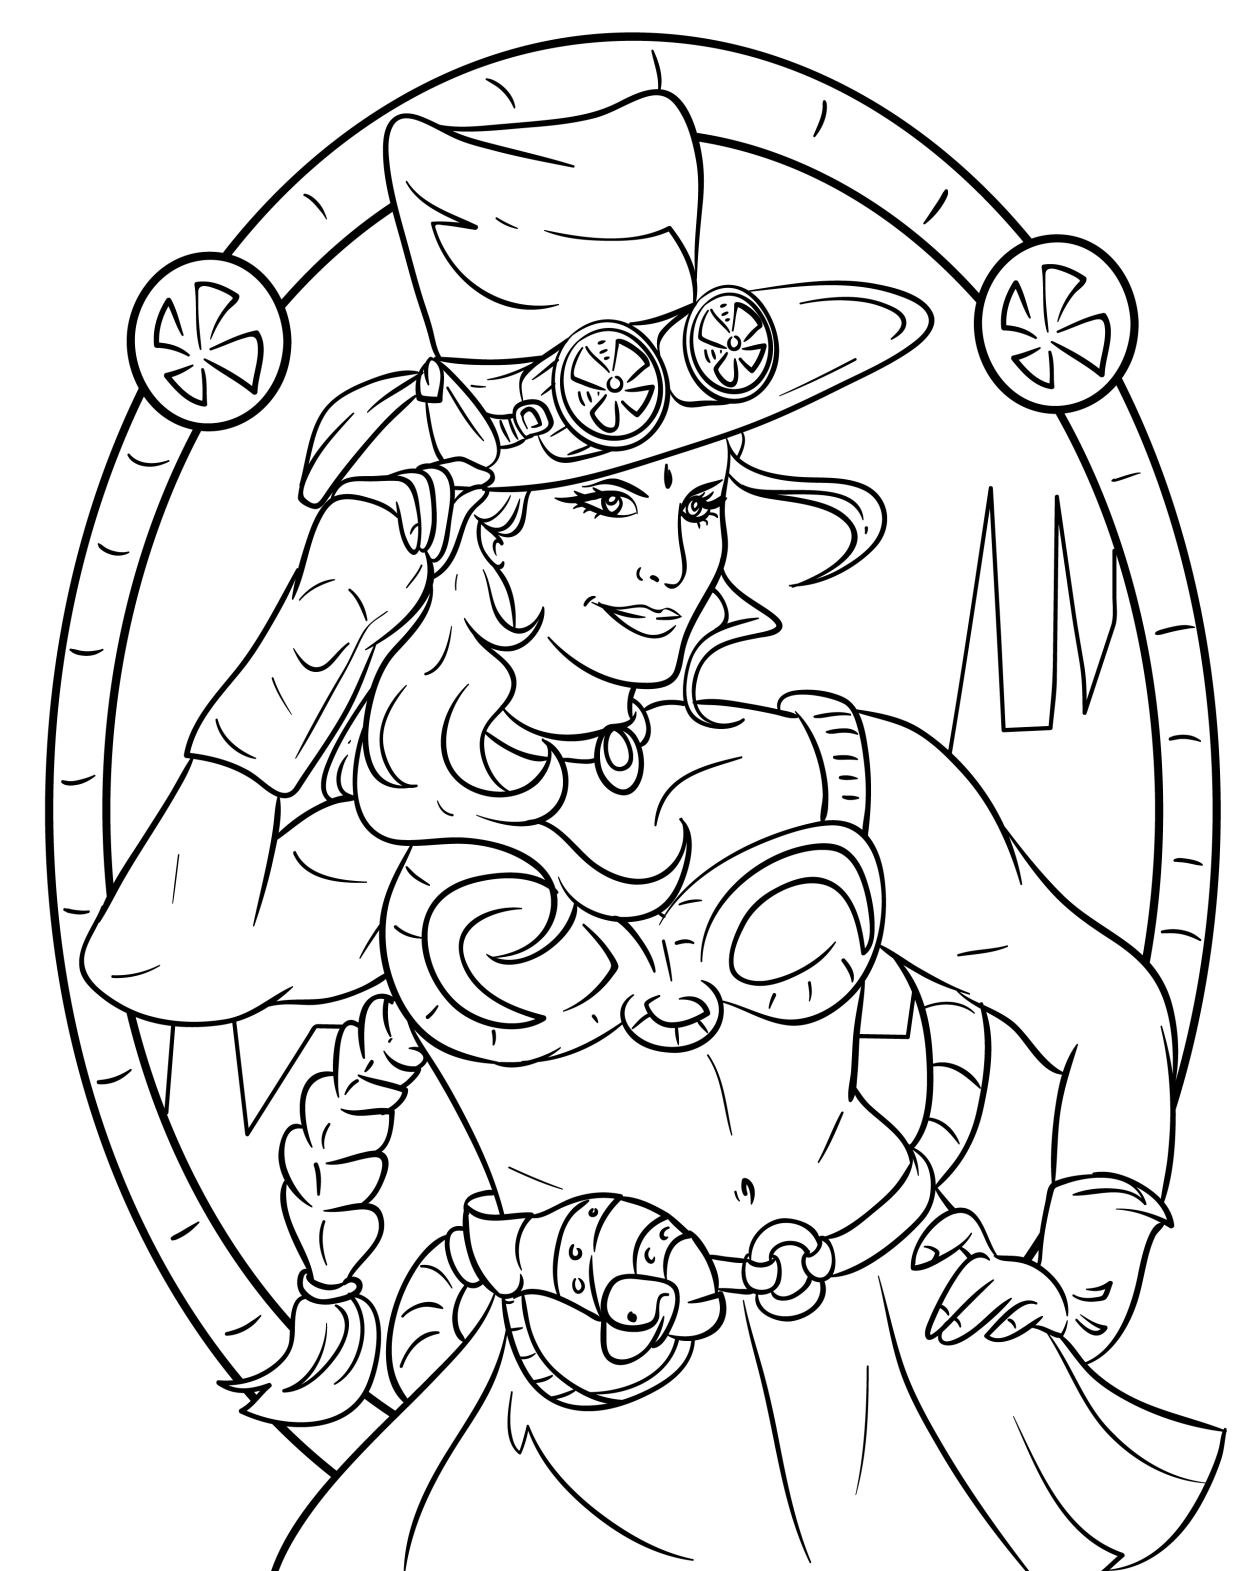 Discover the Best Steampunk Coloring Pages for Free Printable Fun